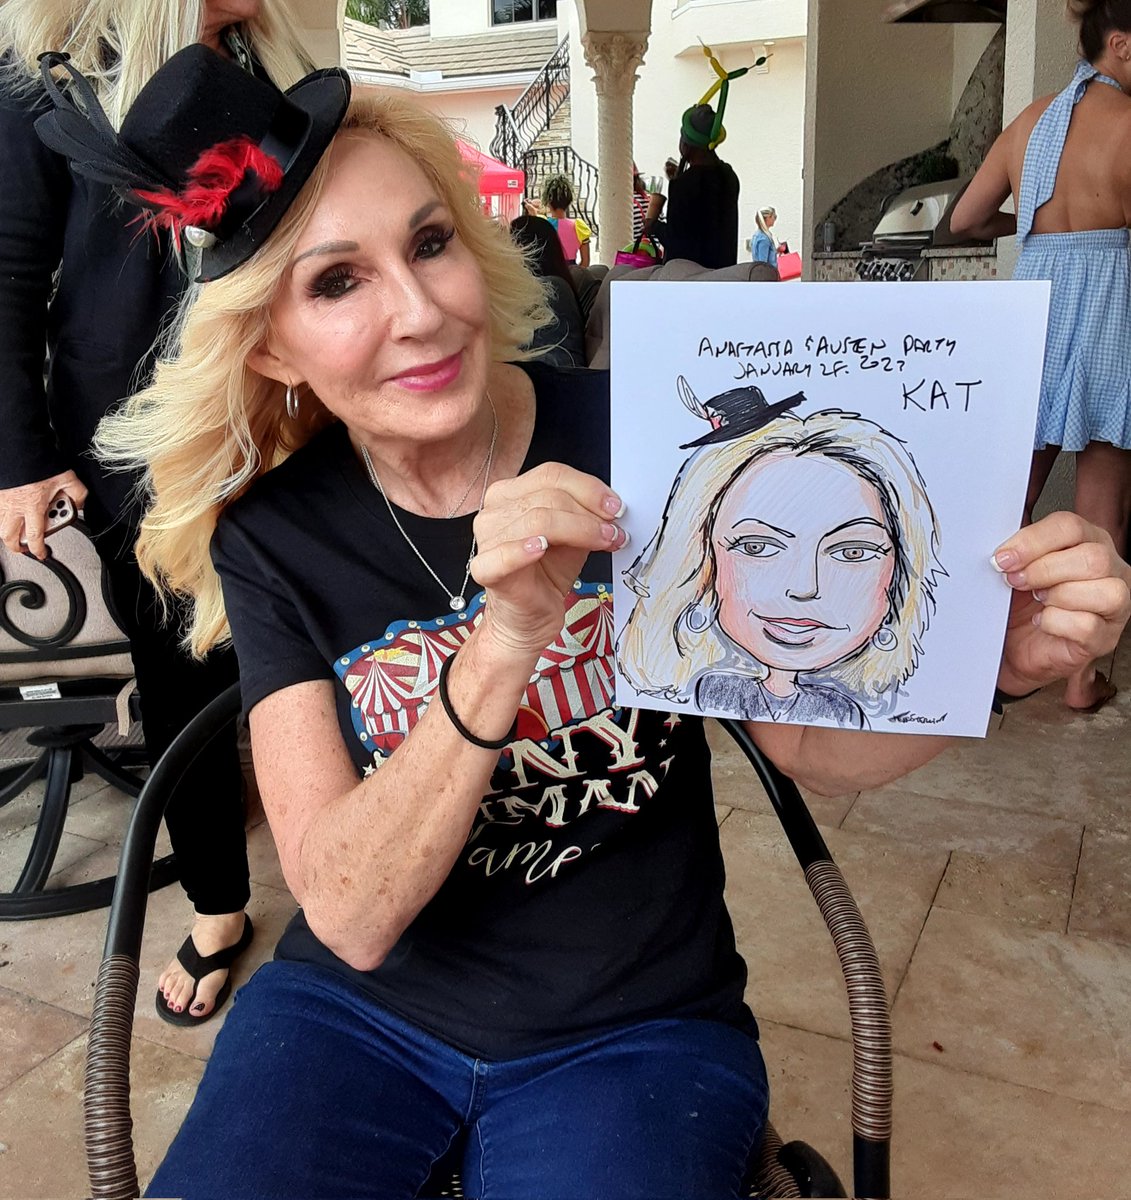 #BirthdayParty #ChildrensParty #Grandmother in #WellingtonFlorida near #BoyntonBeach and #WestPalmBeach enjoyed her flattering #Caricature drawing by #DelrayBeachCaricatureArtist Jeff Sterling of FloridaCaricatures.Com